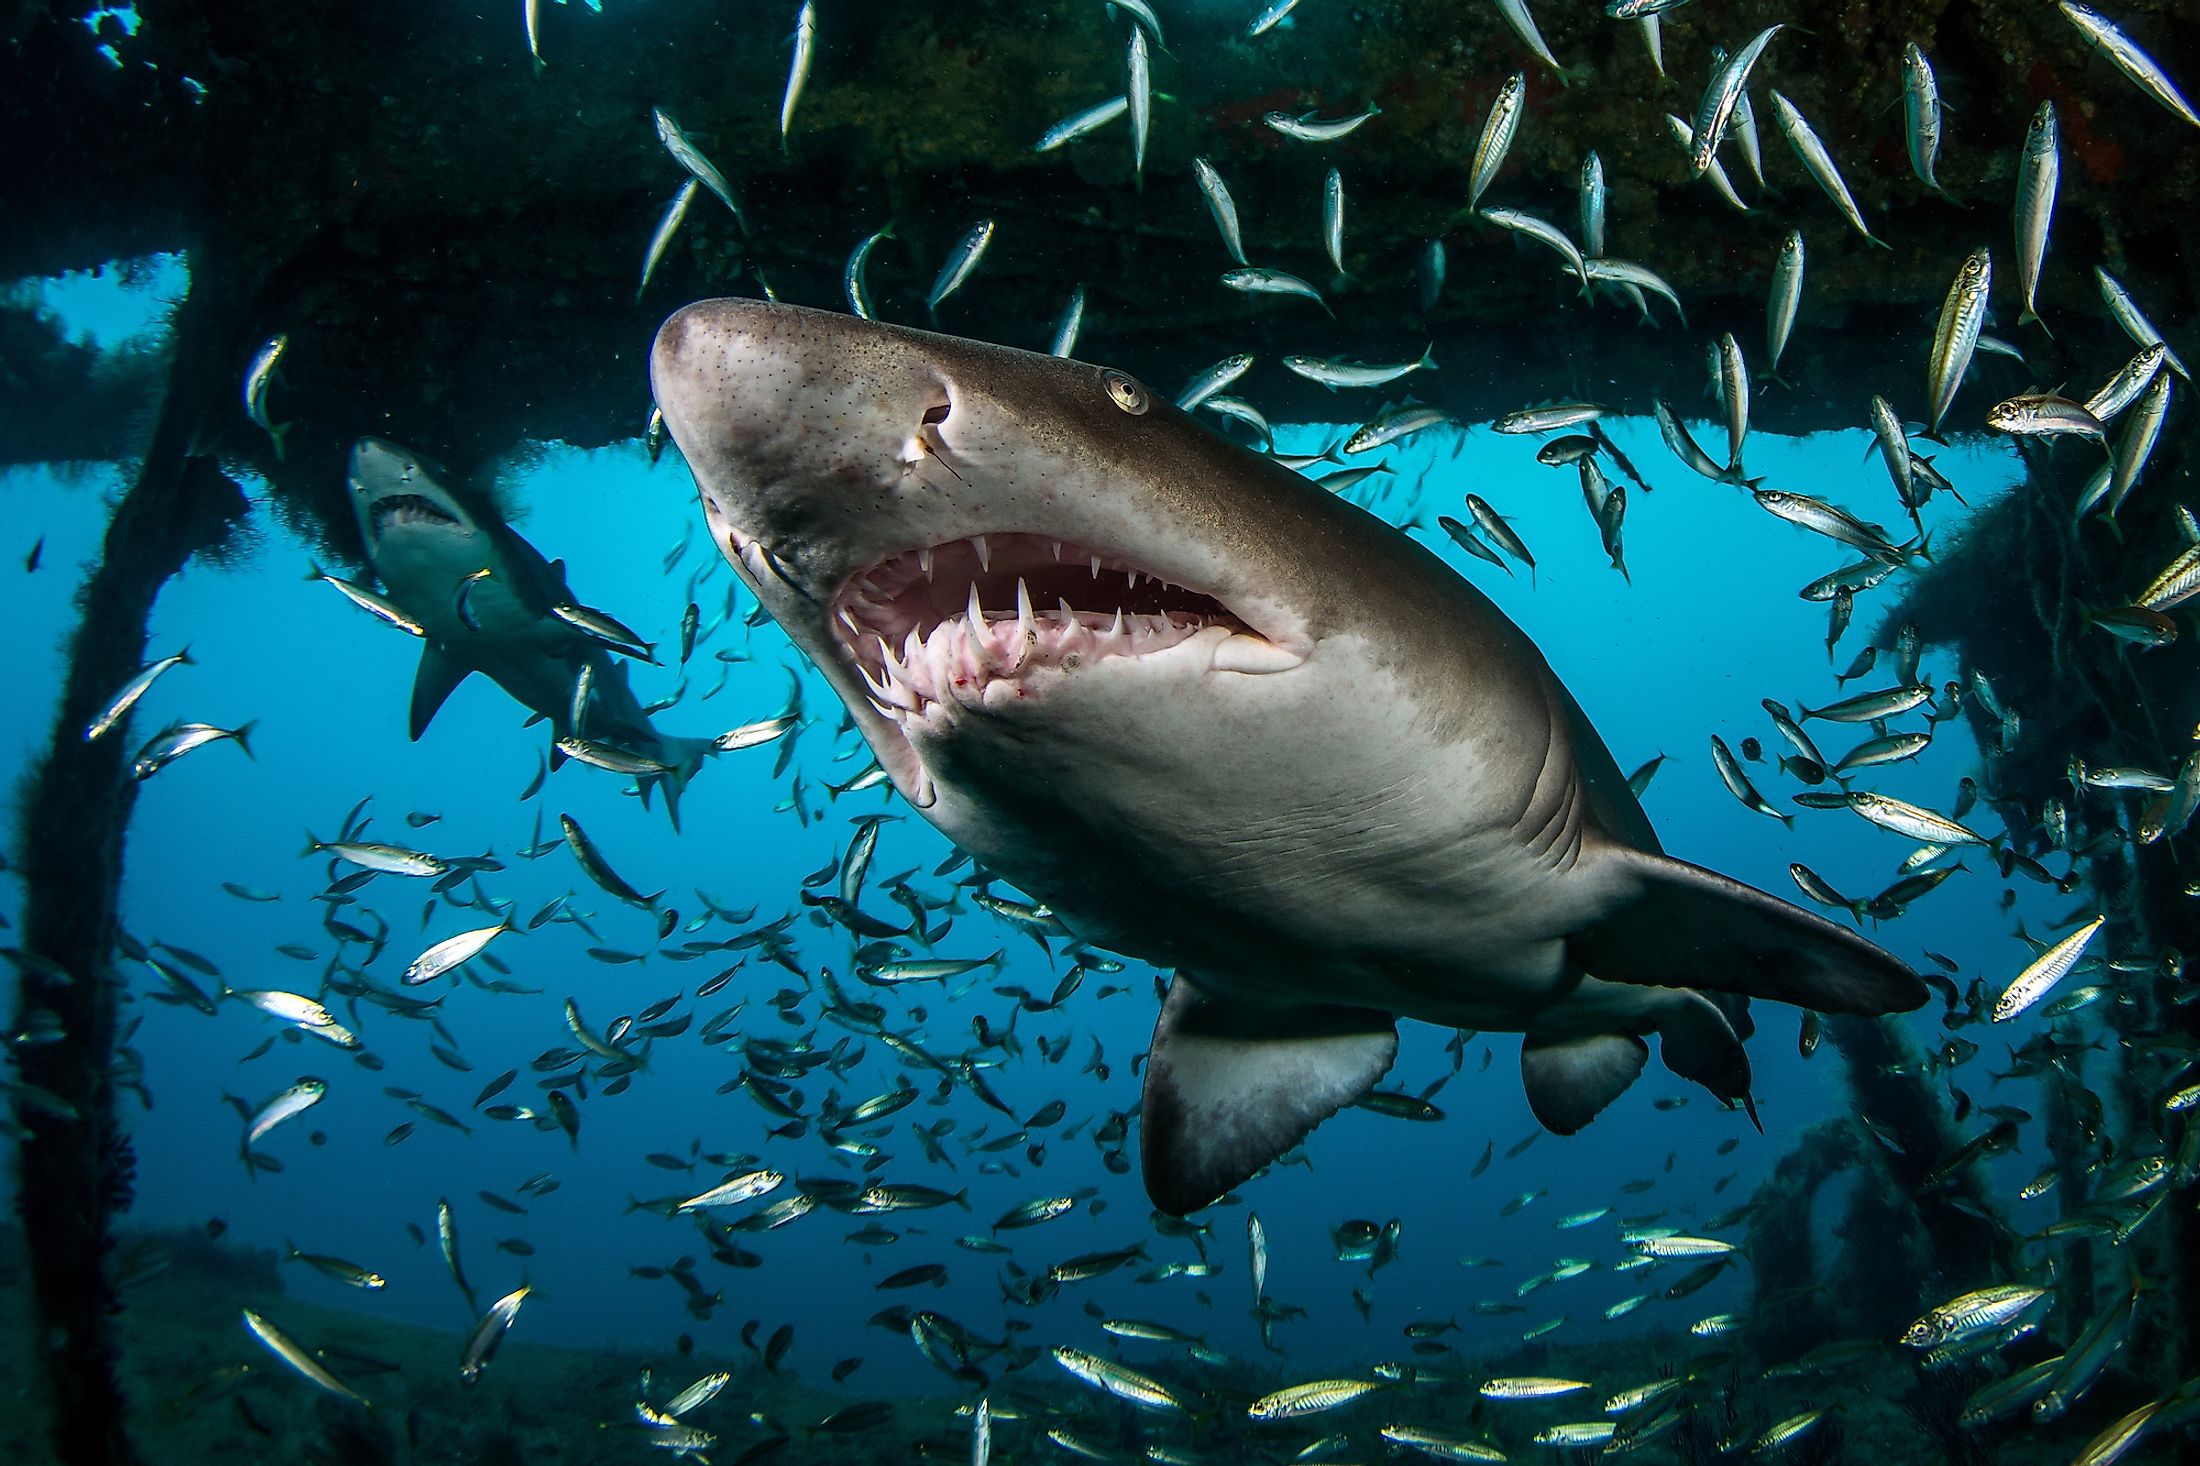 Two massive ragged tooth sharks swimming amidst a school of smaller fish.